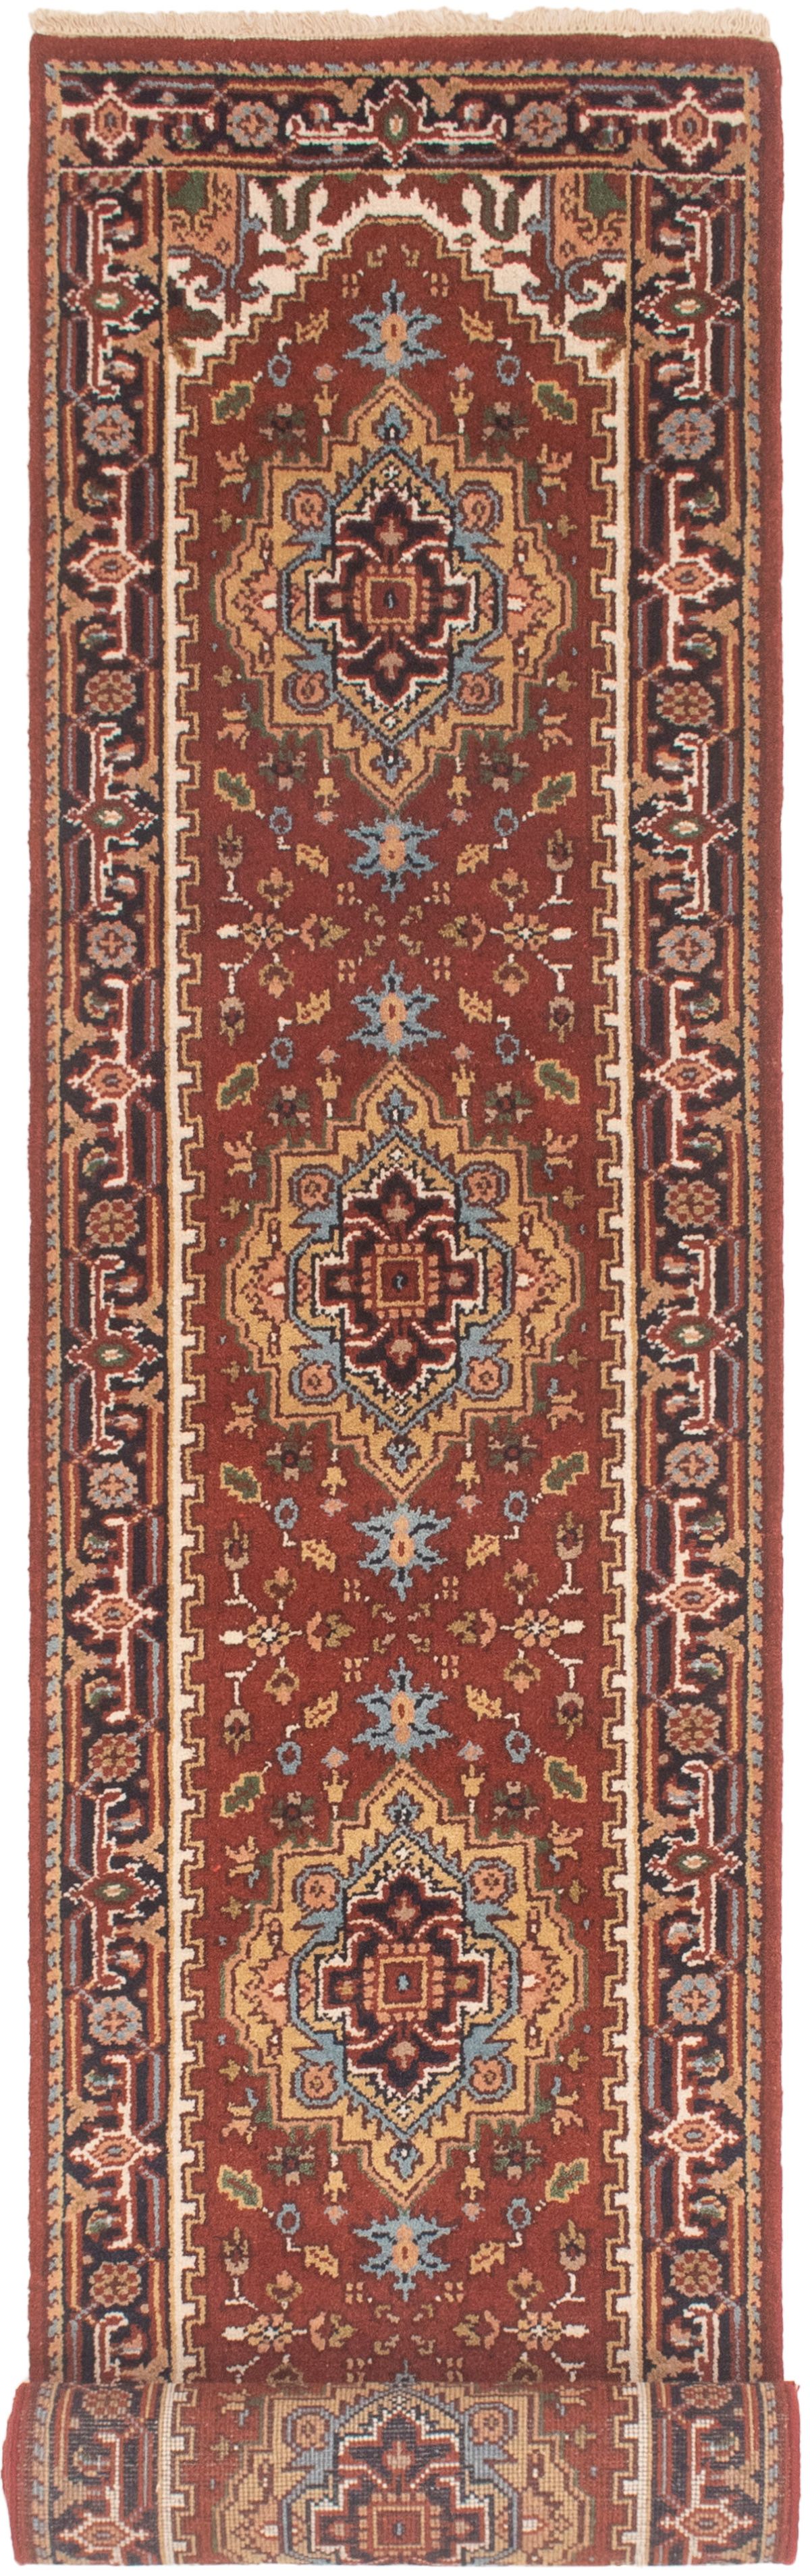 Hand-knotted Serapi Heritage Dark Copper Wool Rug 2'6" x 15'10"  Size: 2'6" x 15'10"  